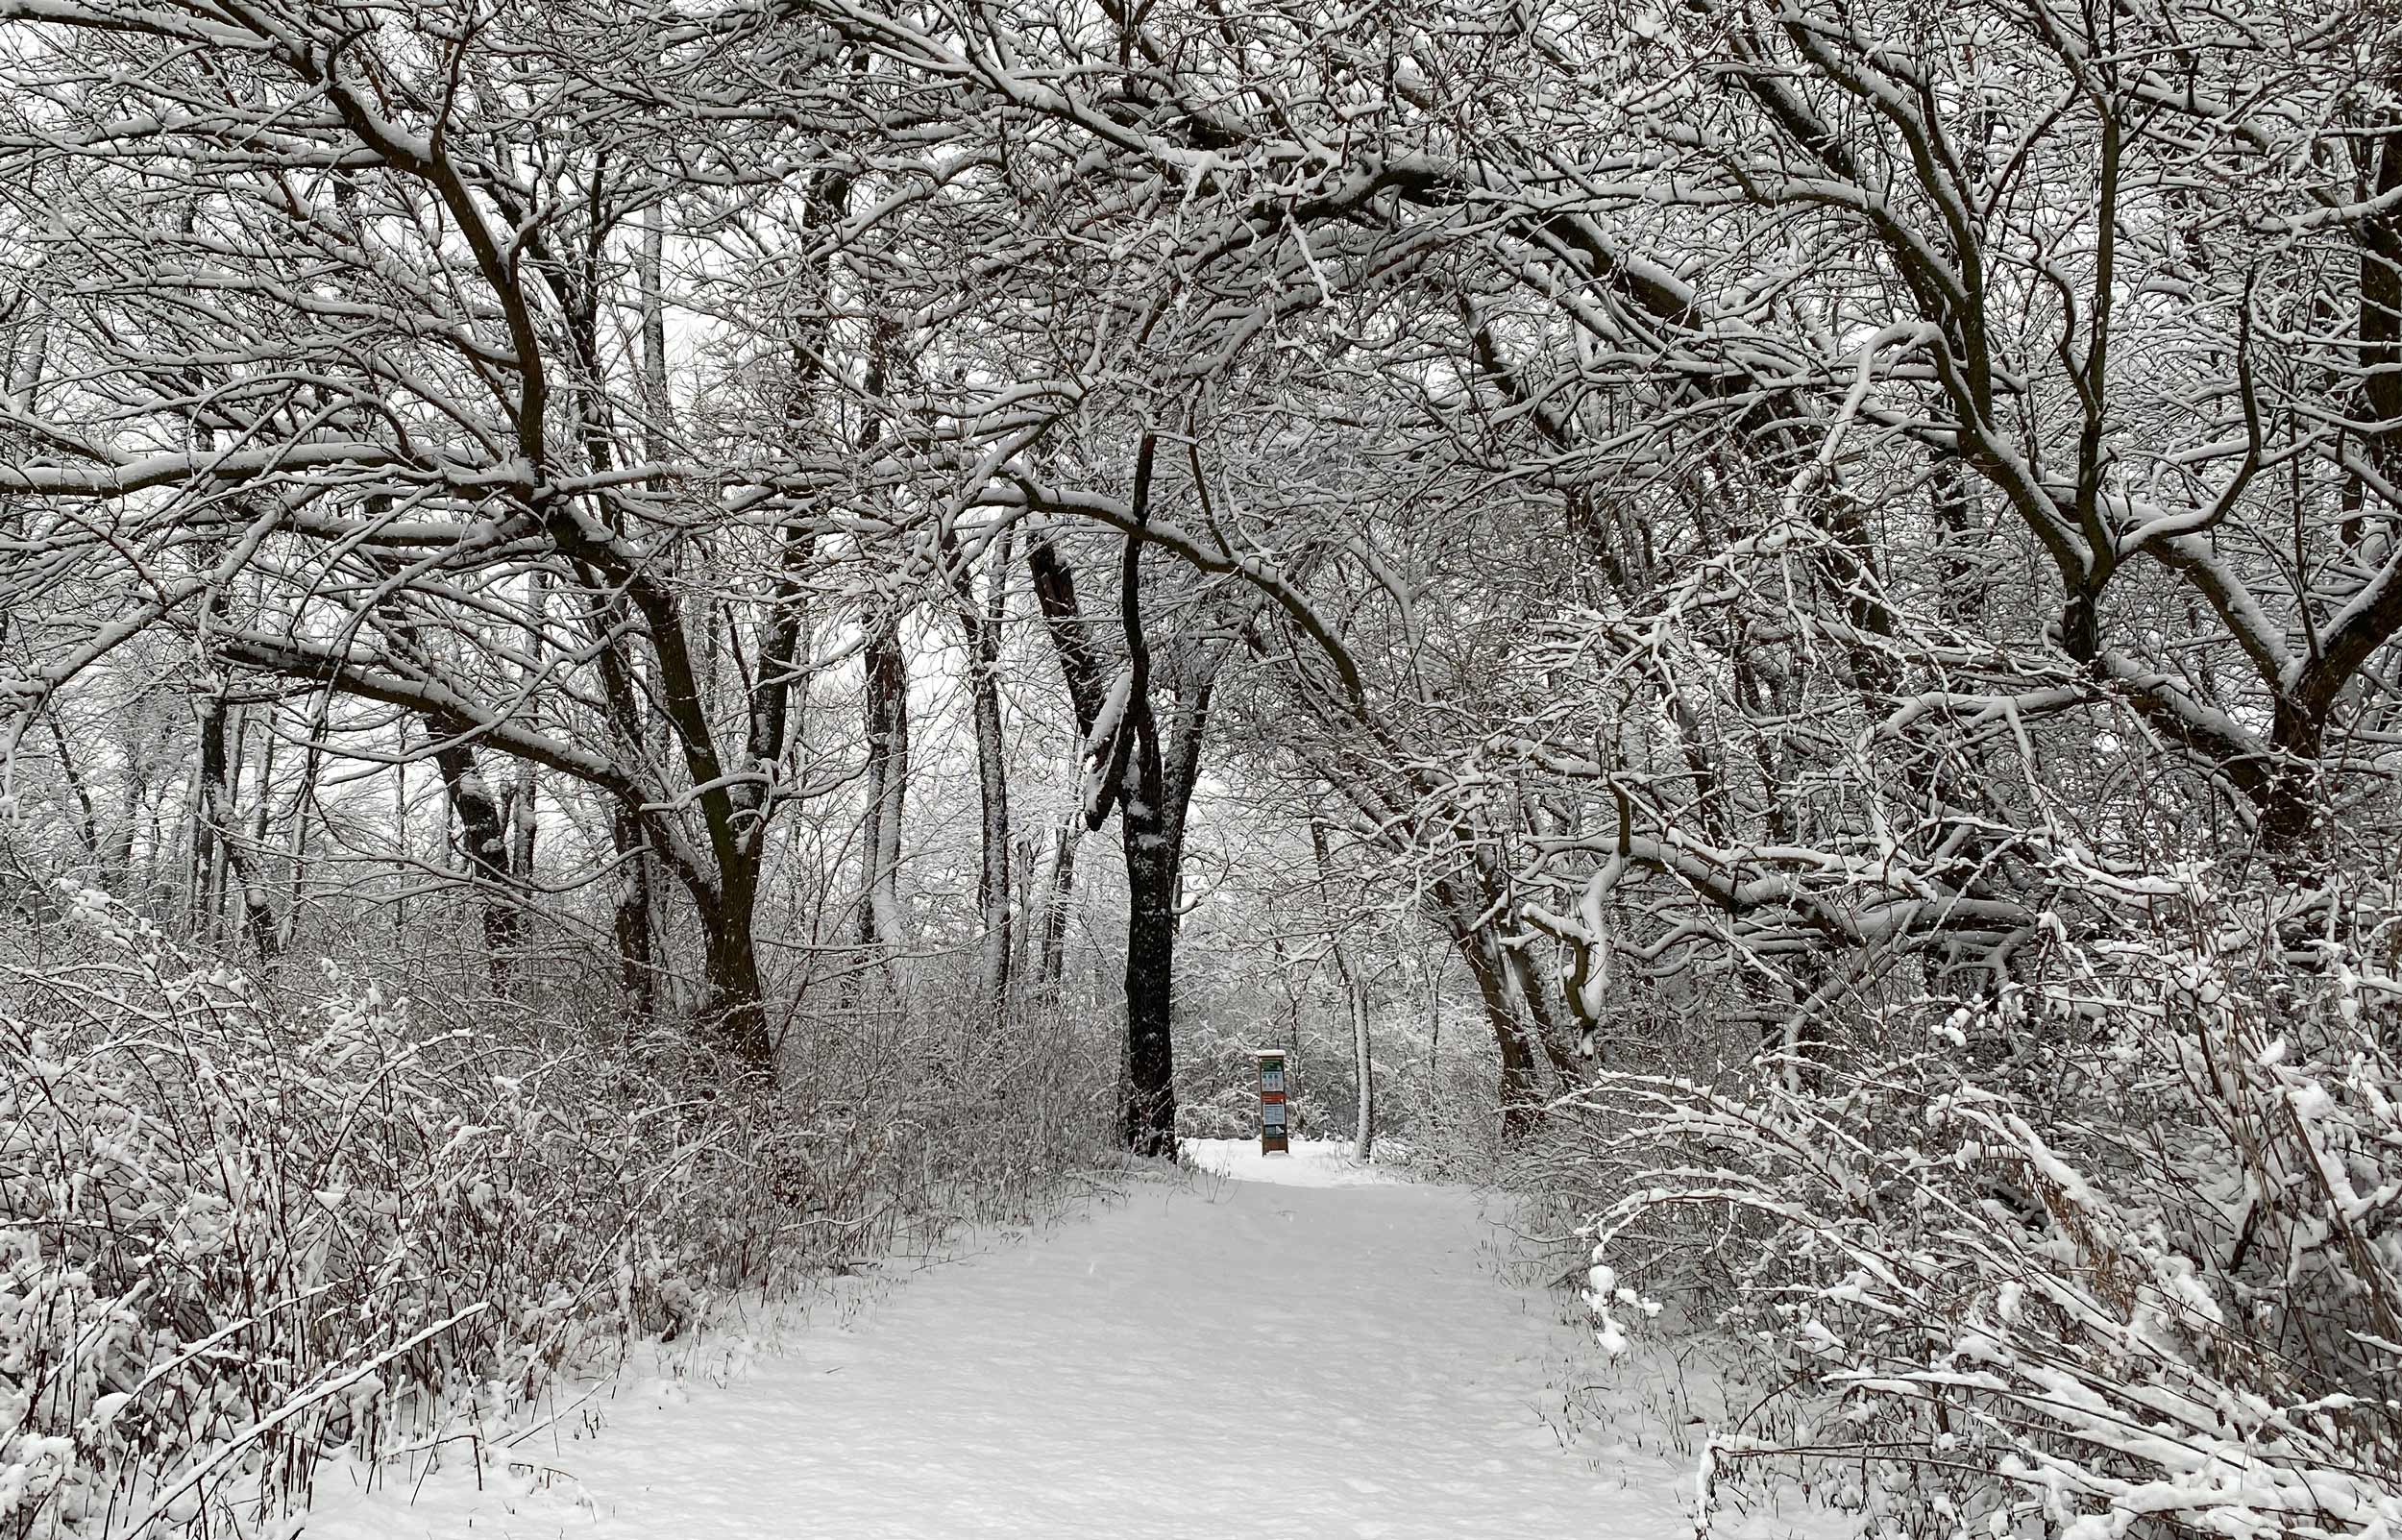 A snow-covered trail with a covered tree canopy and snow-covered branches.